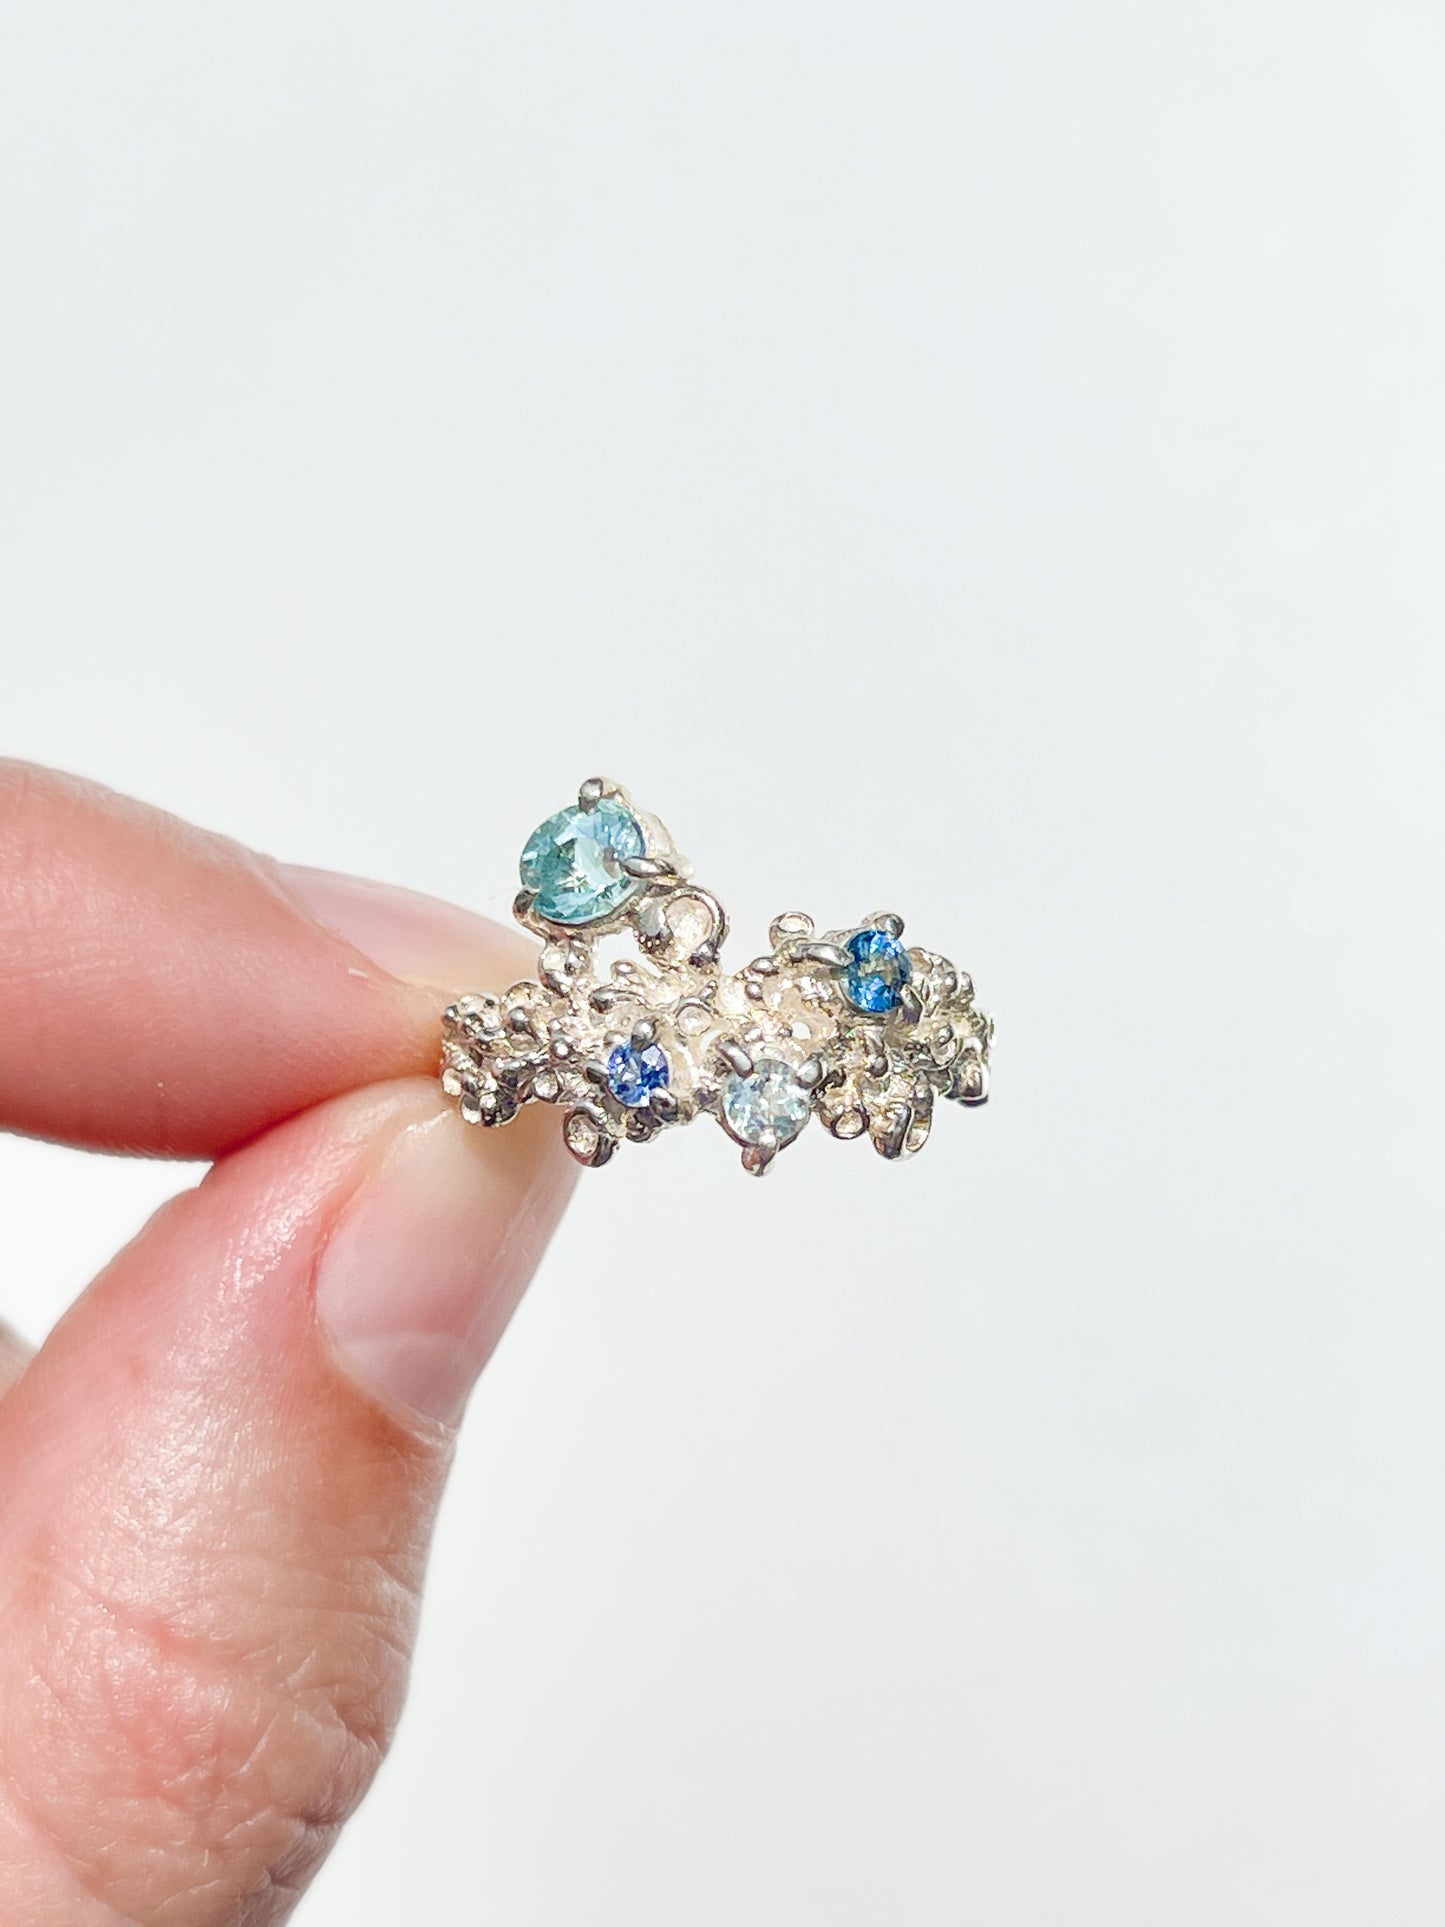 Coral Ring Silver with Blue Sapphires & Aquamarine - size 7